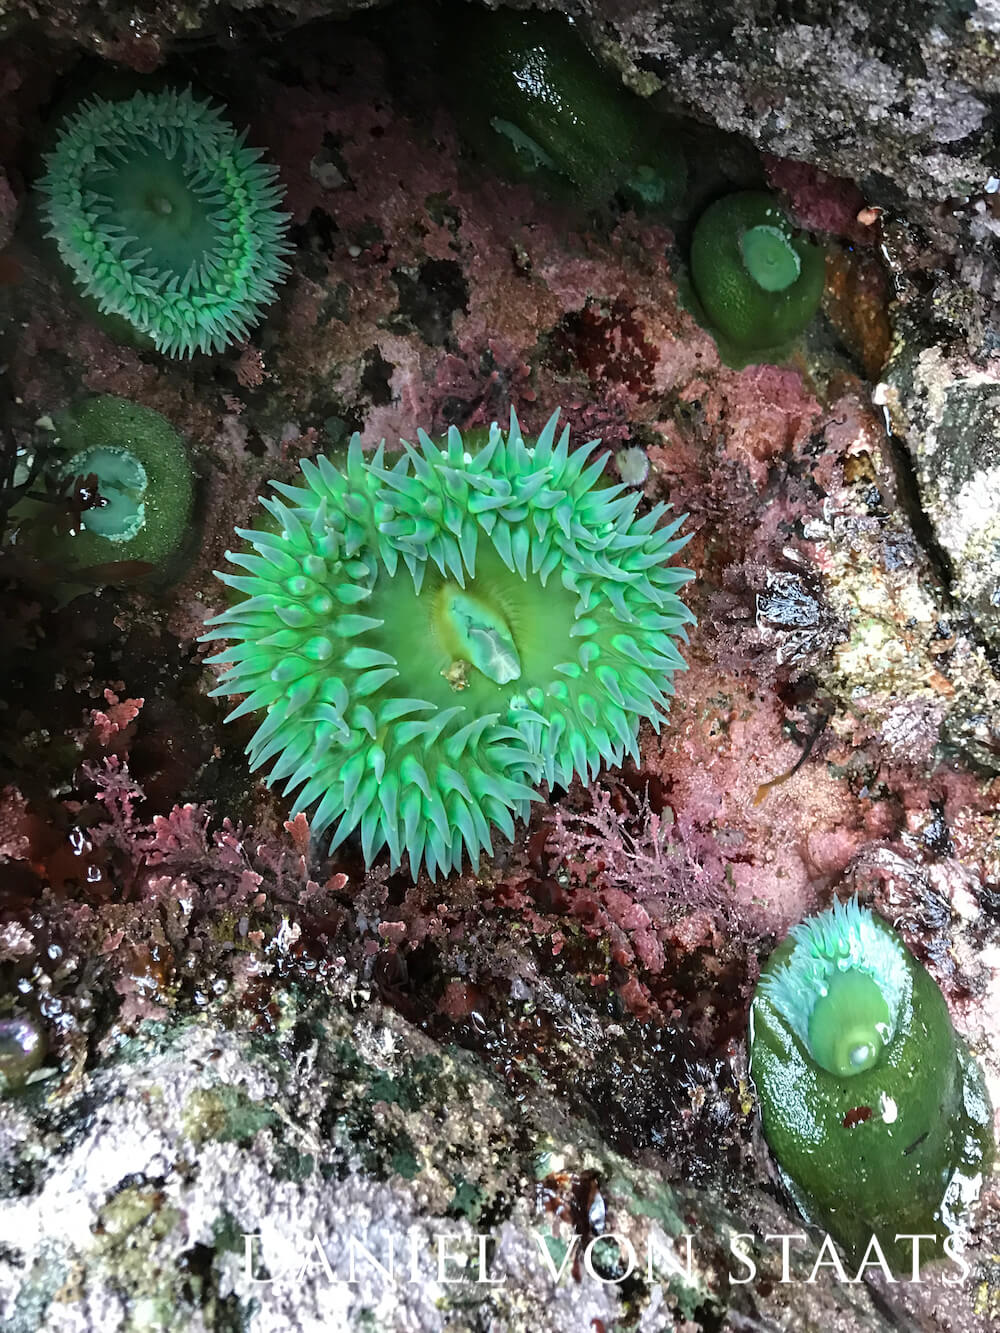 A collection of green surf anemones on a mauve-colored surface.